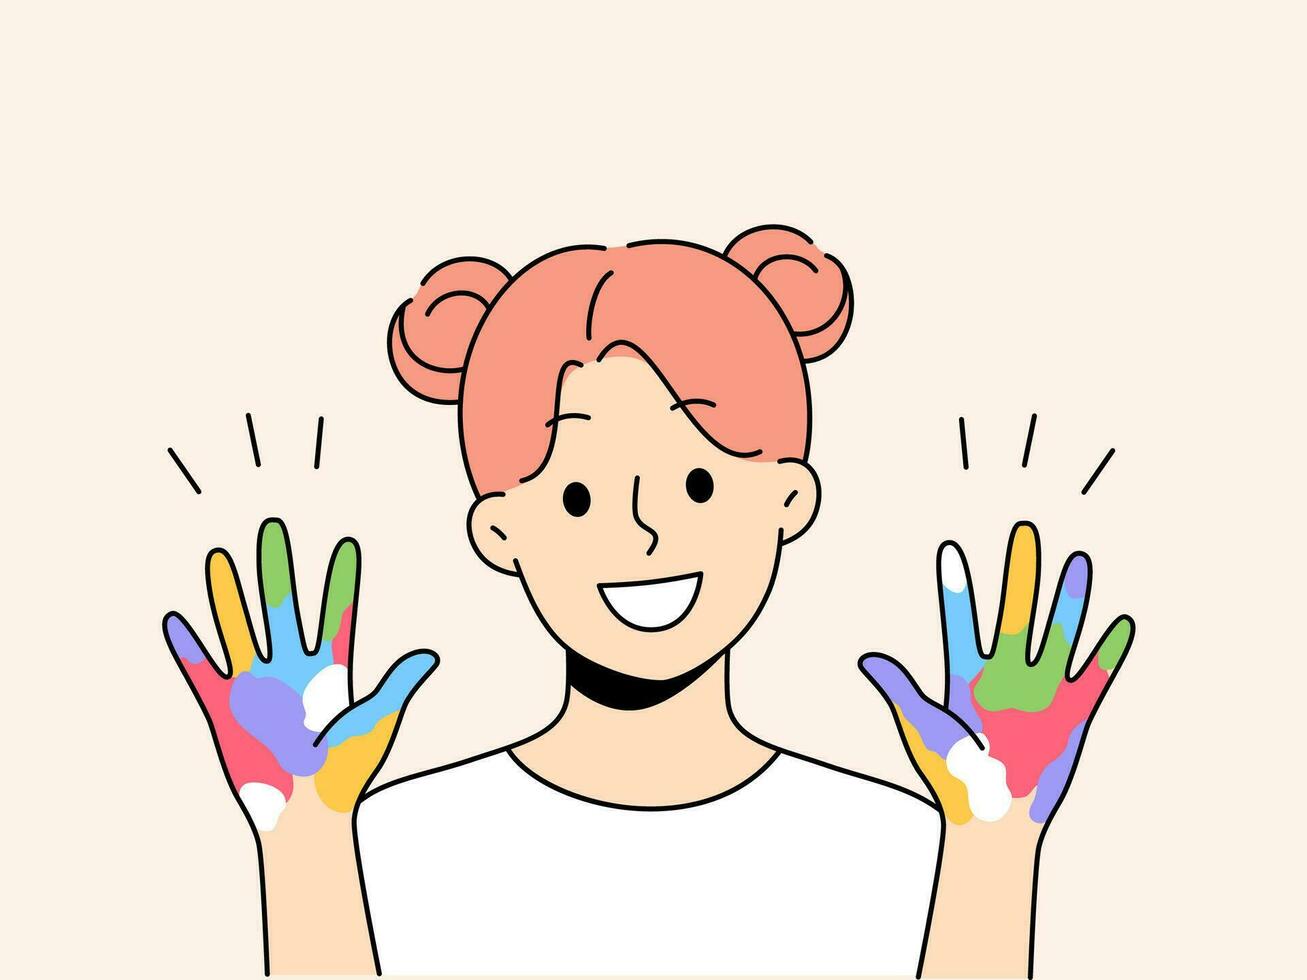 Little artist girl shows colorful palms painted with watercolors, offering to painting together. Schoolgirl who loves painting and creativity, dreams of creating masterpiece or working in field of art vector